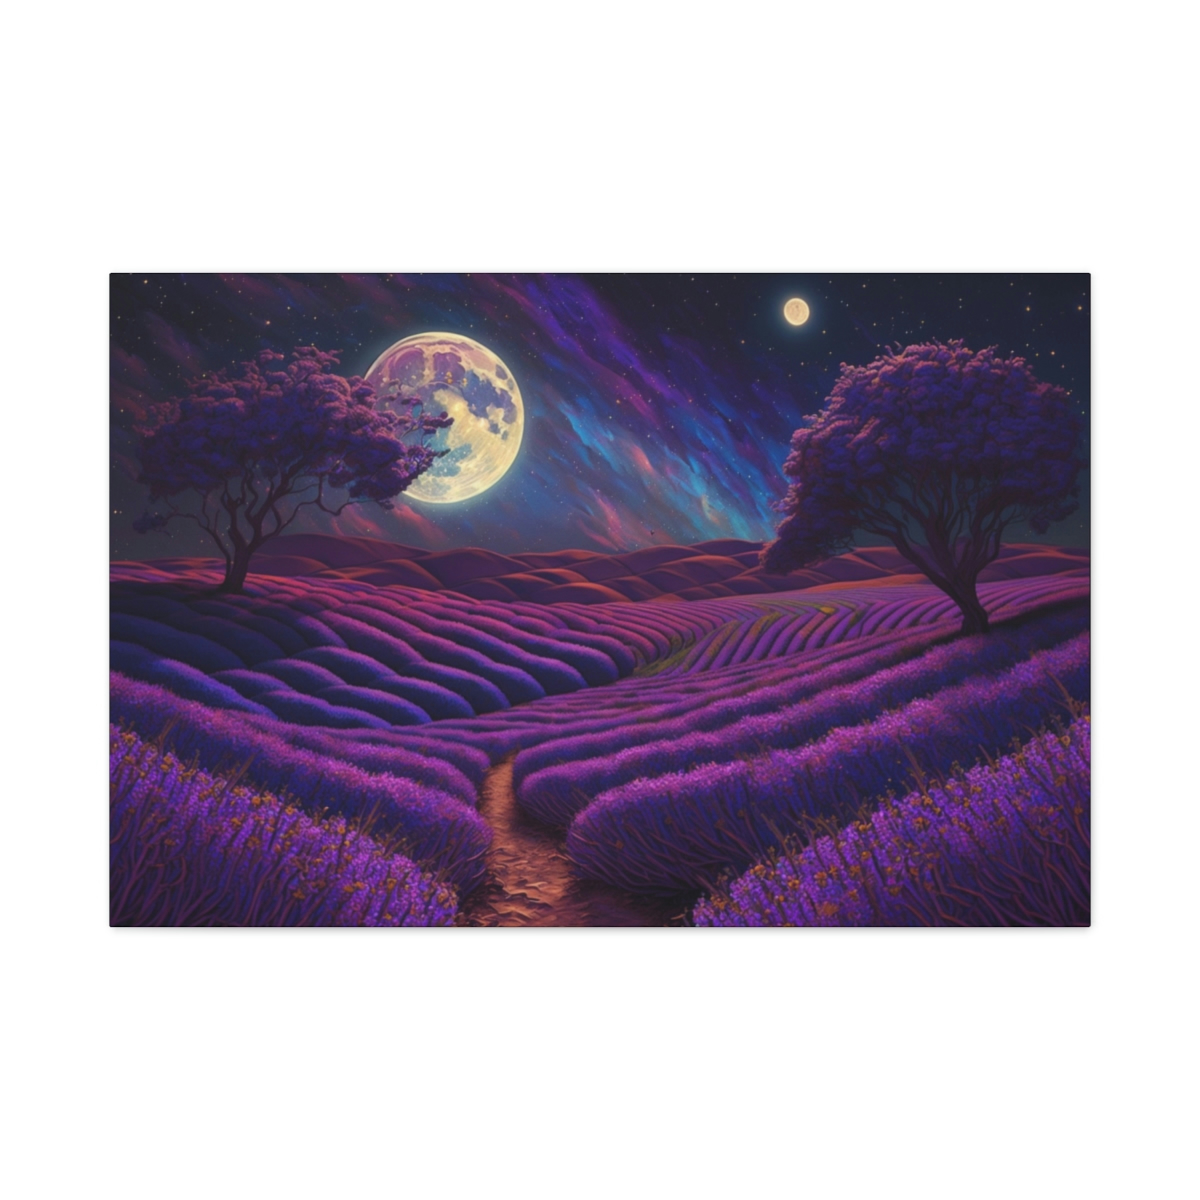 Trippy Art Canvas Print: The Violet Meadow